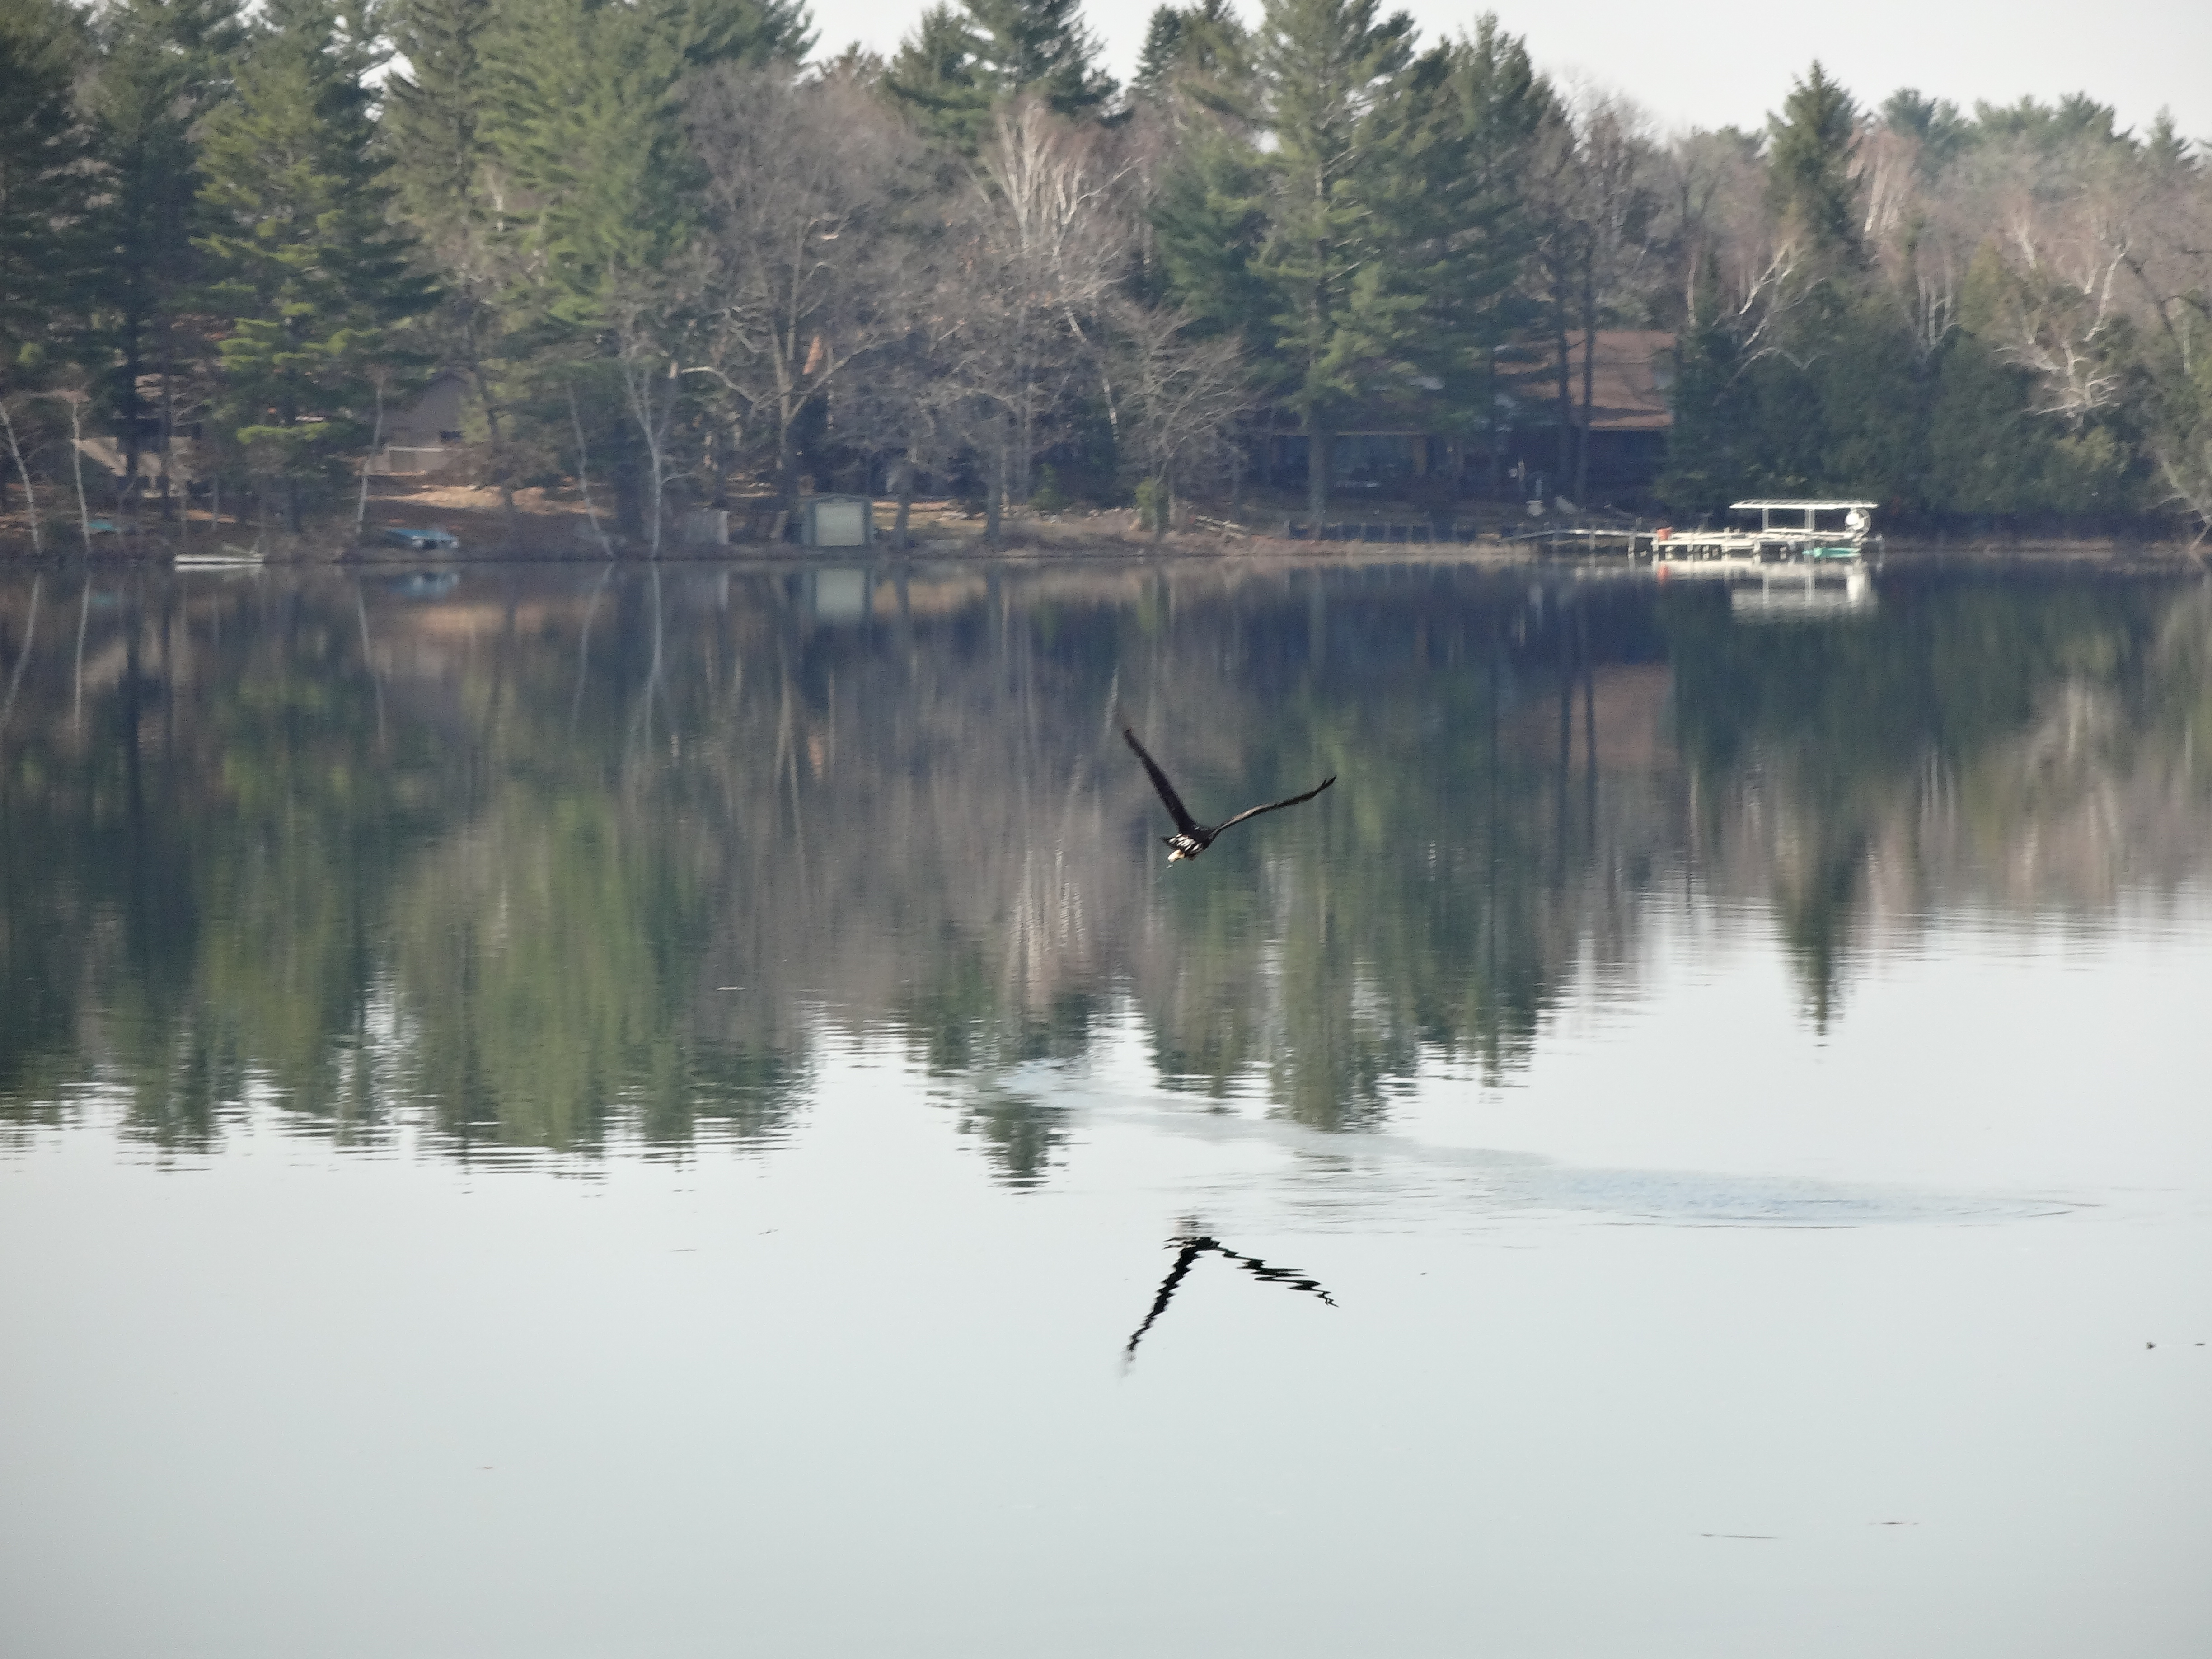 This beautiful bird of prey on Columbia Lake swooped down and picked up a bite to eat, a little fish, and flew away leaving a water trail behind it!